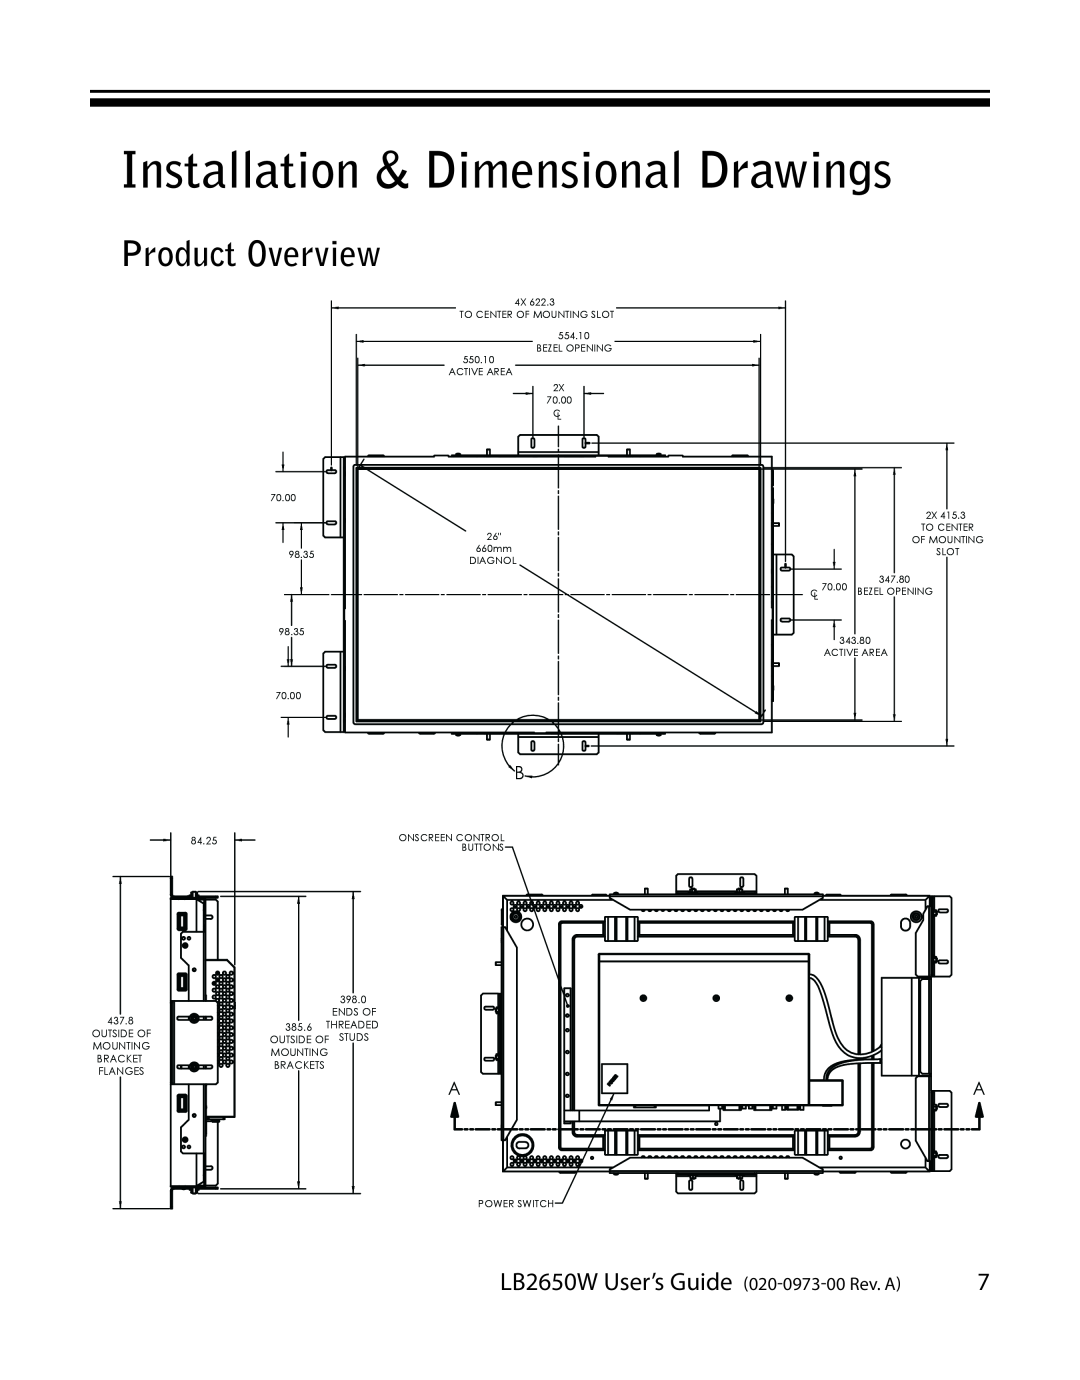 Planar LB2650W manual Installation & Dimensional Drawings, Product Overview 